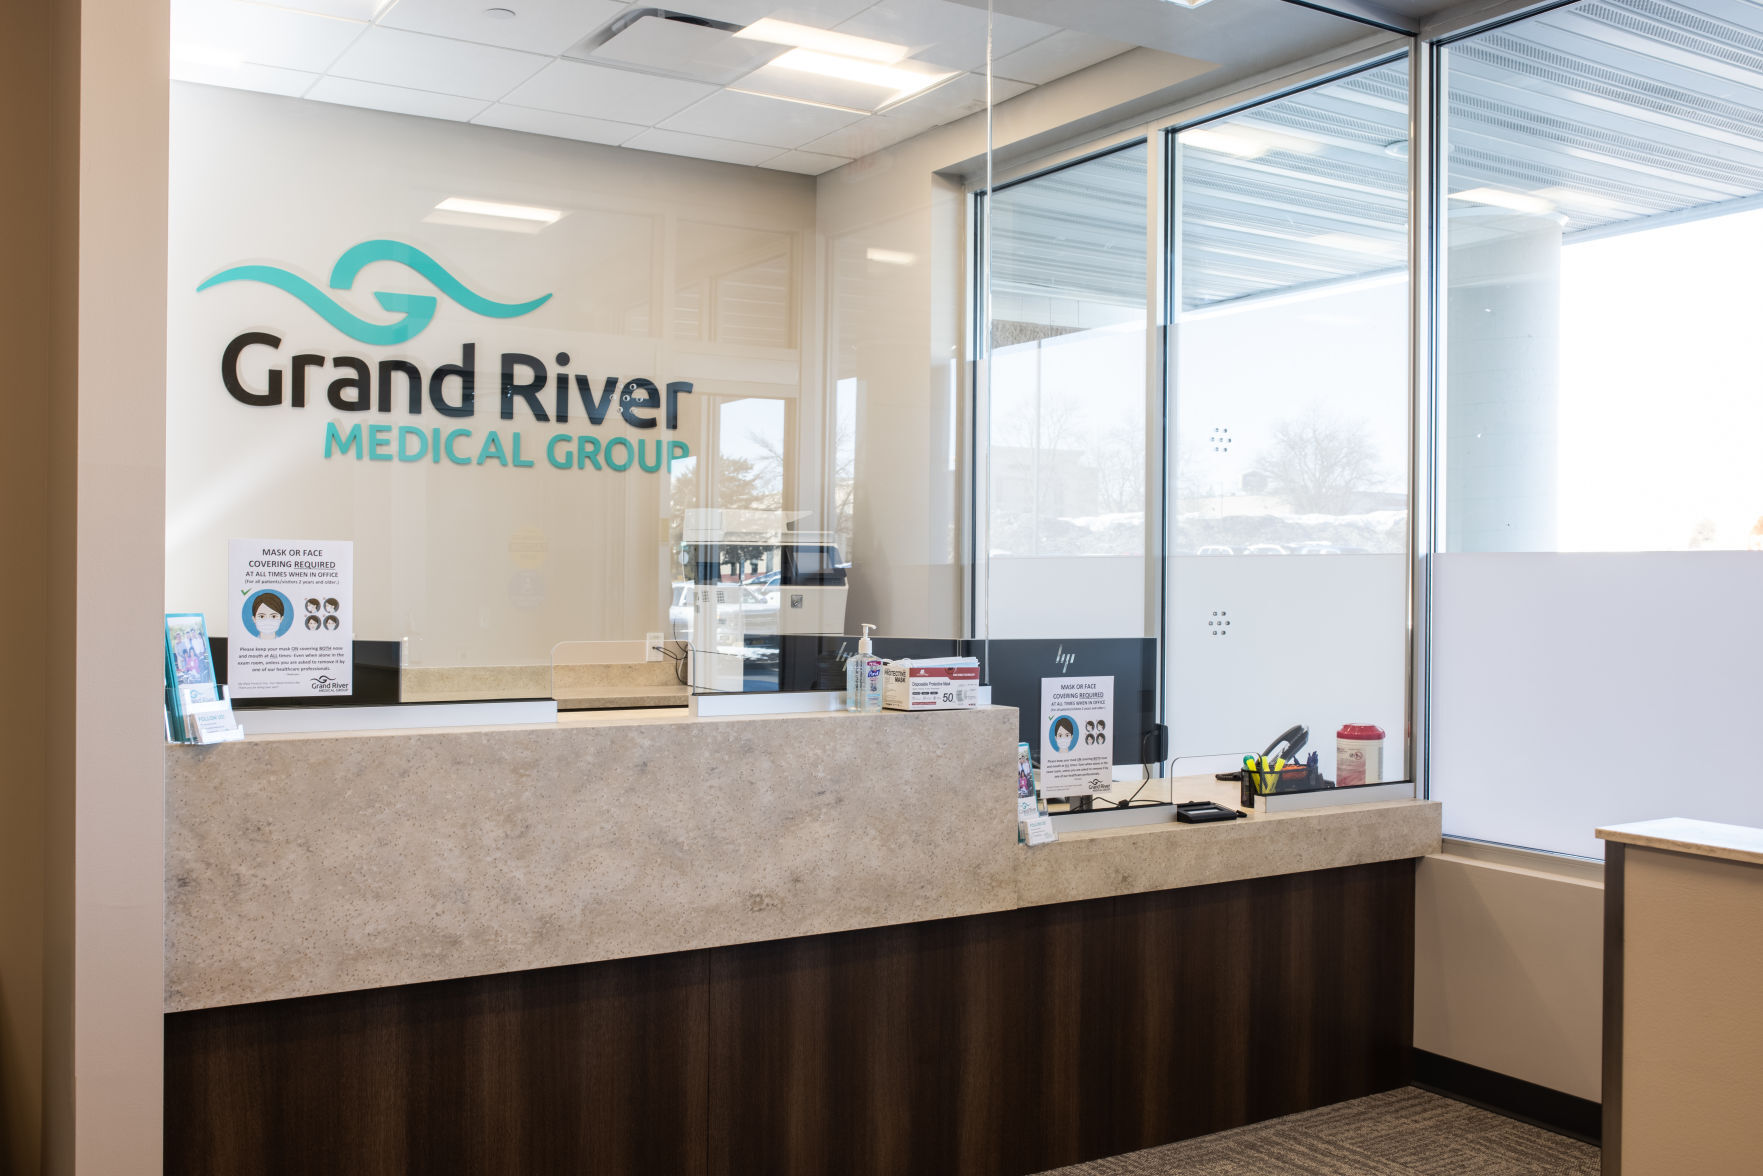 Grand River Medical Group Urgent Care facility is located at 3500 Dodge Street in Dubuque. PHOTO CREDIT: Jacob Fiscus